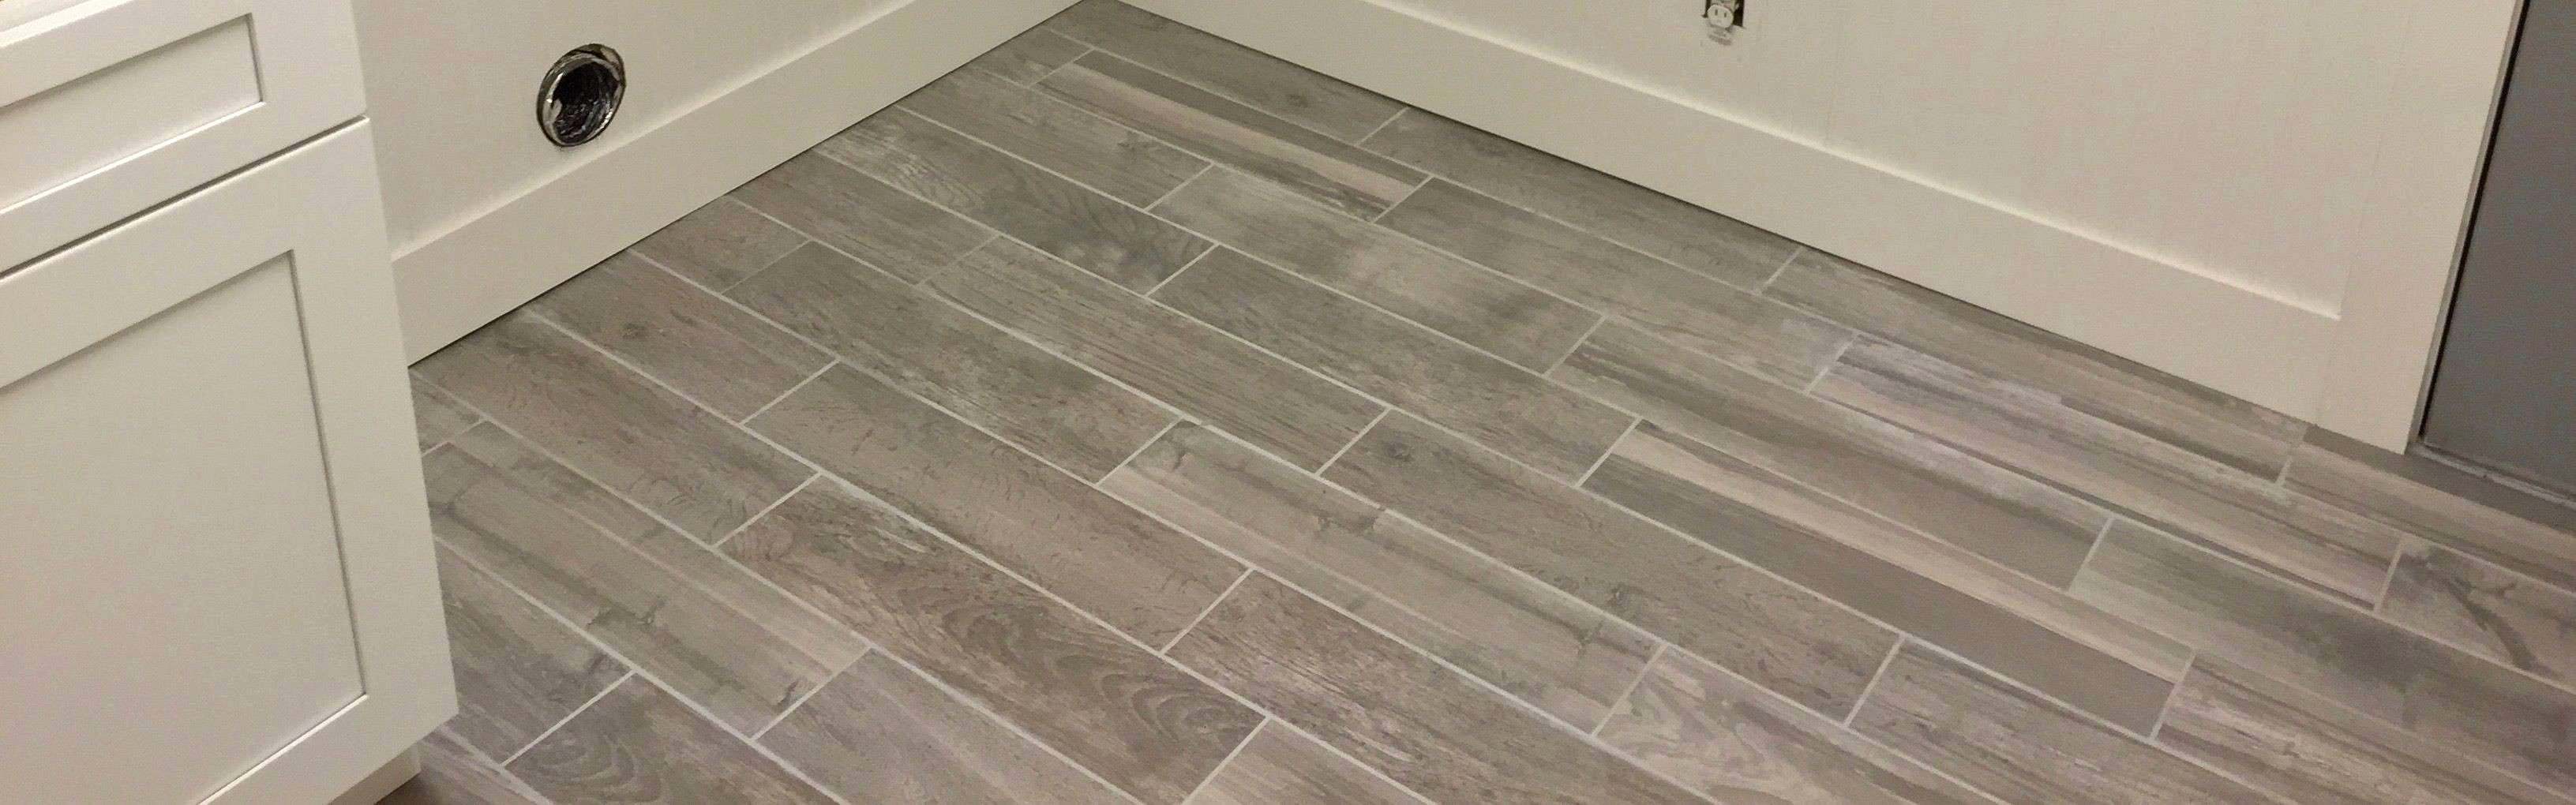 20 Perfect How to Lay Hardwood Floor Pattern 2024 free download how to lay hardwood floor pattern of tile installation cost floor transition laminate to herringbone tile in unique bathroom tiling ideas best h sink install bathroom i 0d exciting beautiful